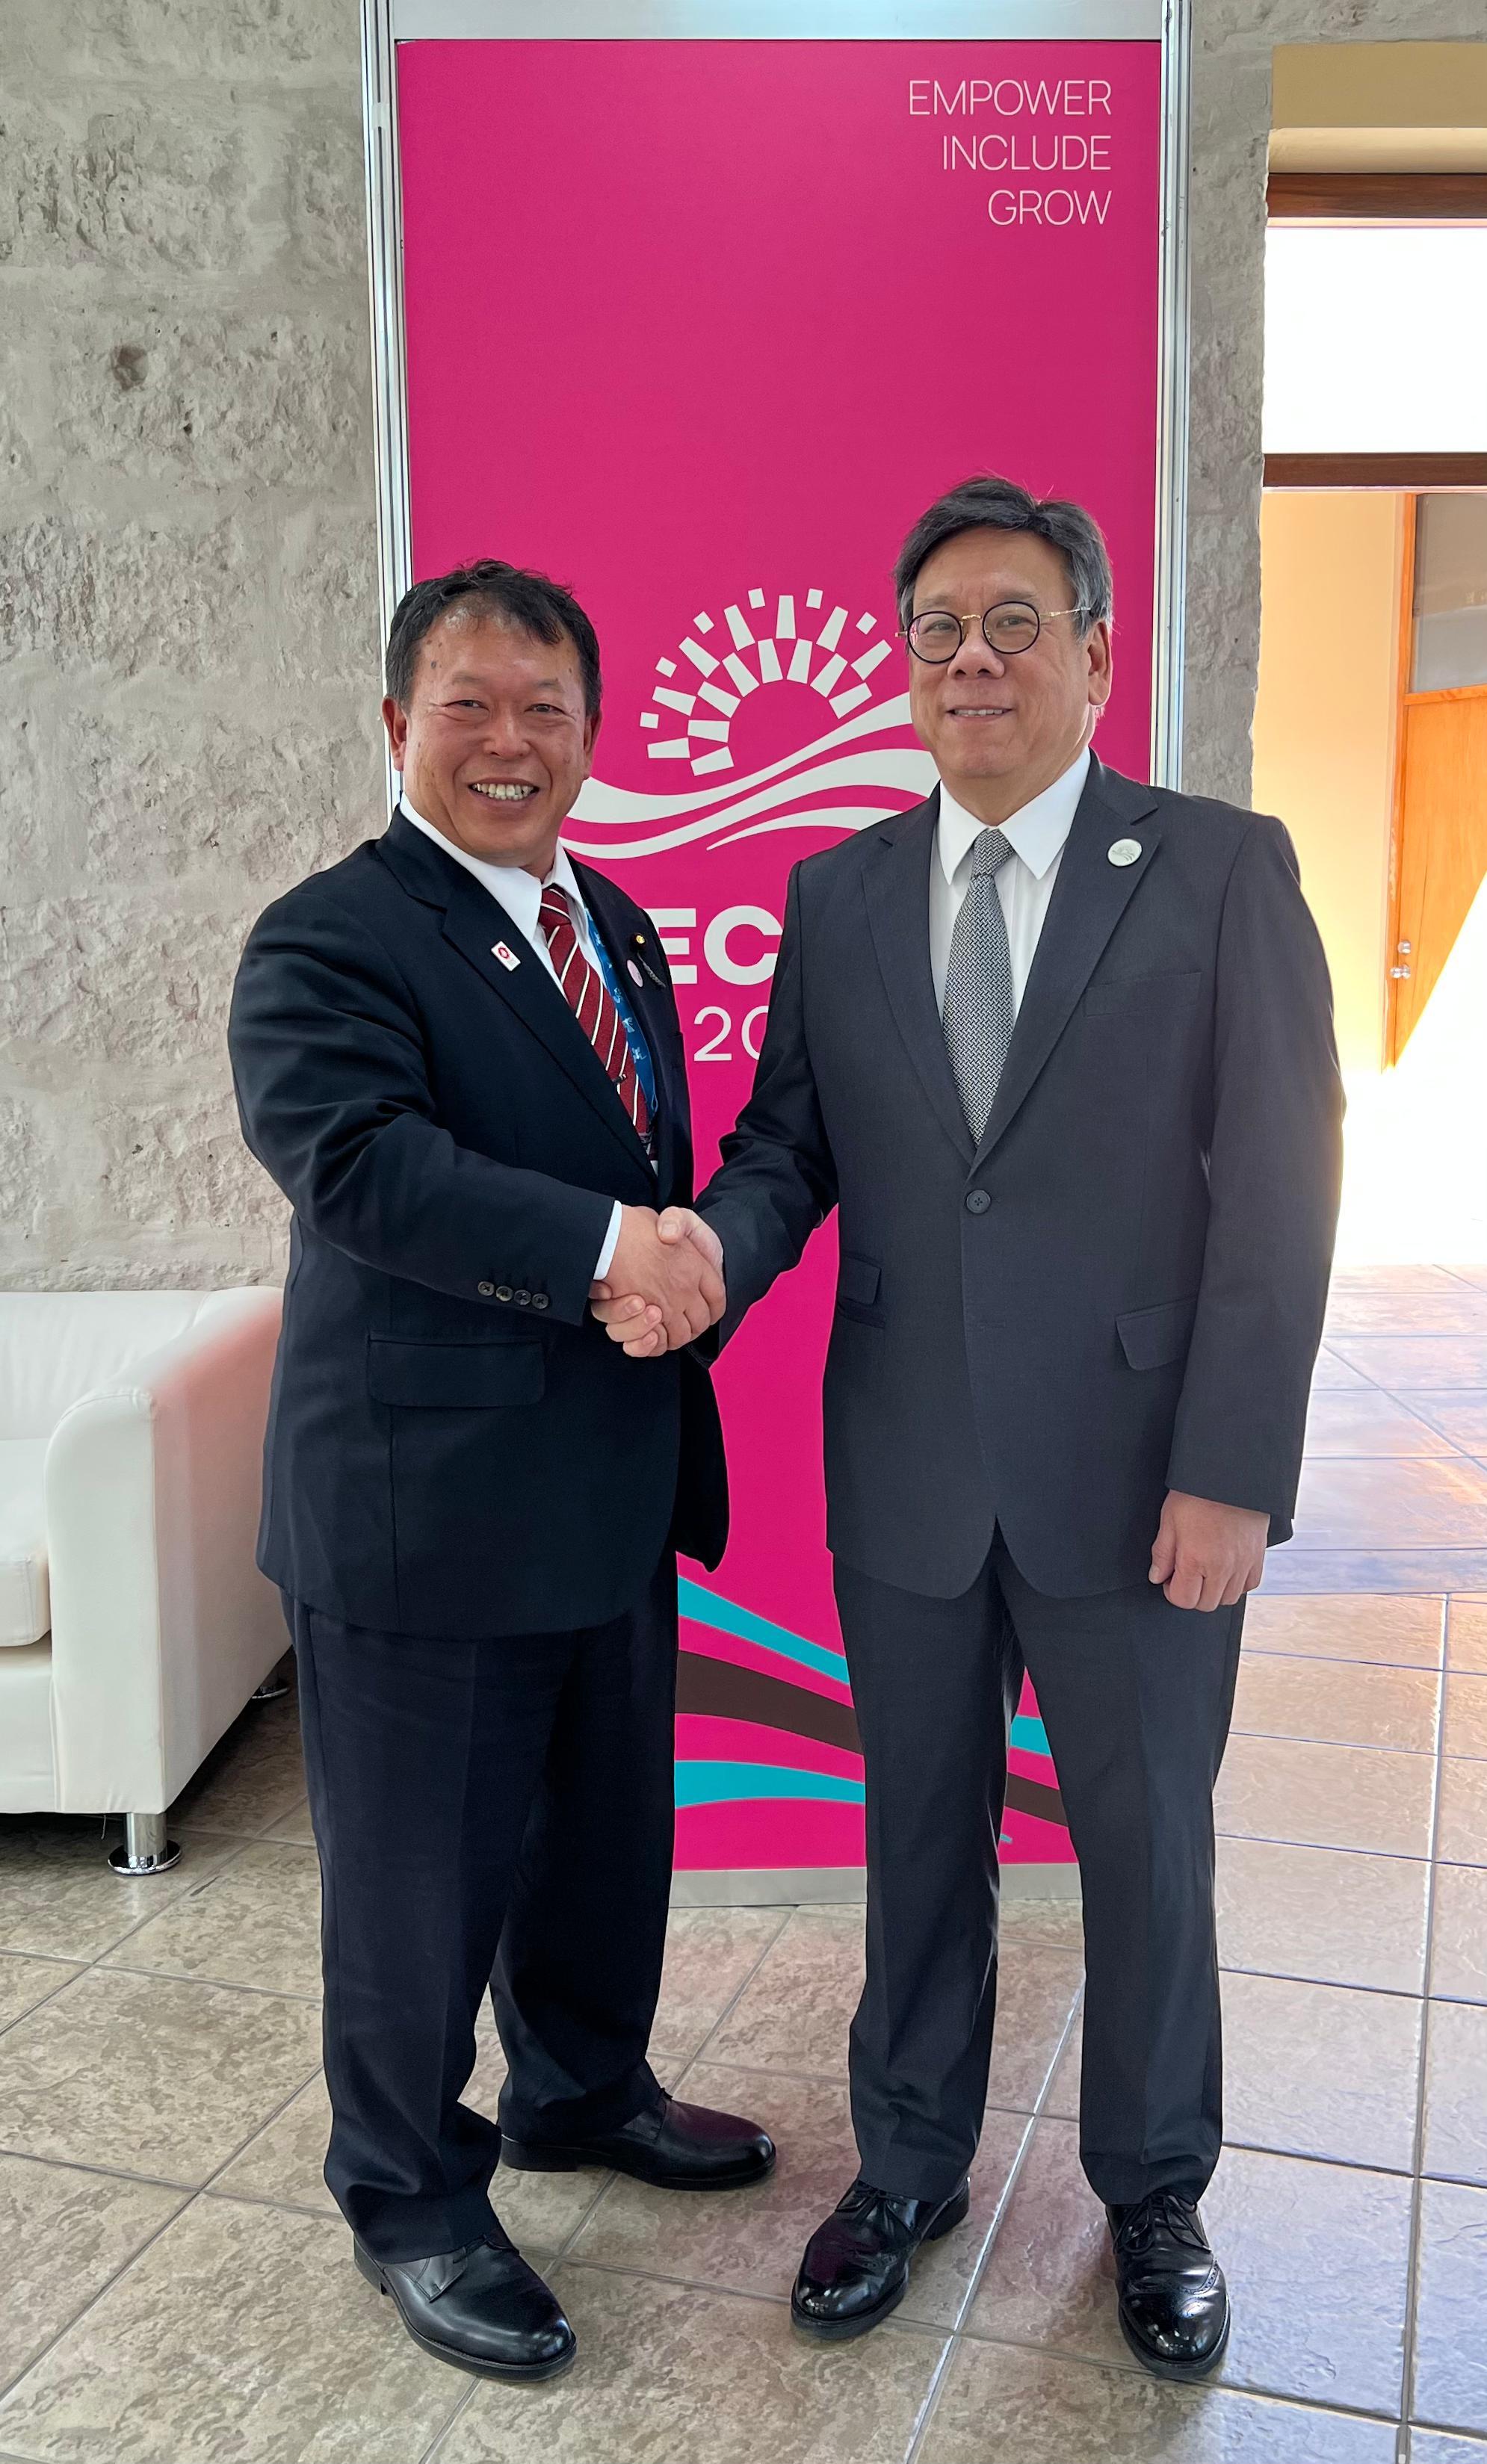 The Secretary for Commerce and Economic Development, Mr Algernon Yau (right), meets with the Parliamentary Vice-Minister of Economy, Trade and Industry of Japan, Mr Taku Ishii (left), to exchange views on issues of mutual concern on the sidelines of the Asia-Pacific Economic Cooperation Ministers Responsible for Trade Meeting in Arequipa, Peru, on May 17 (Arequipa time).